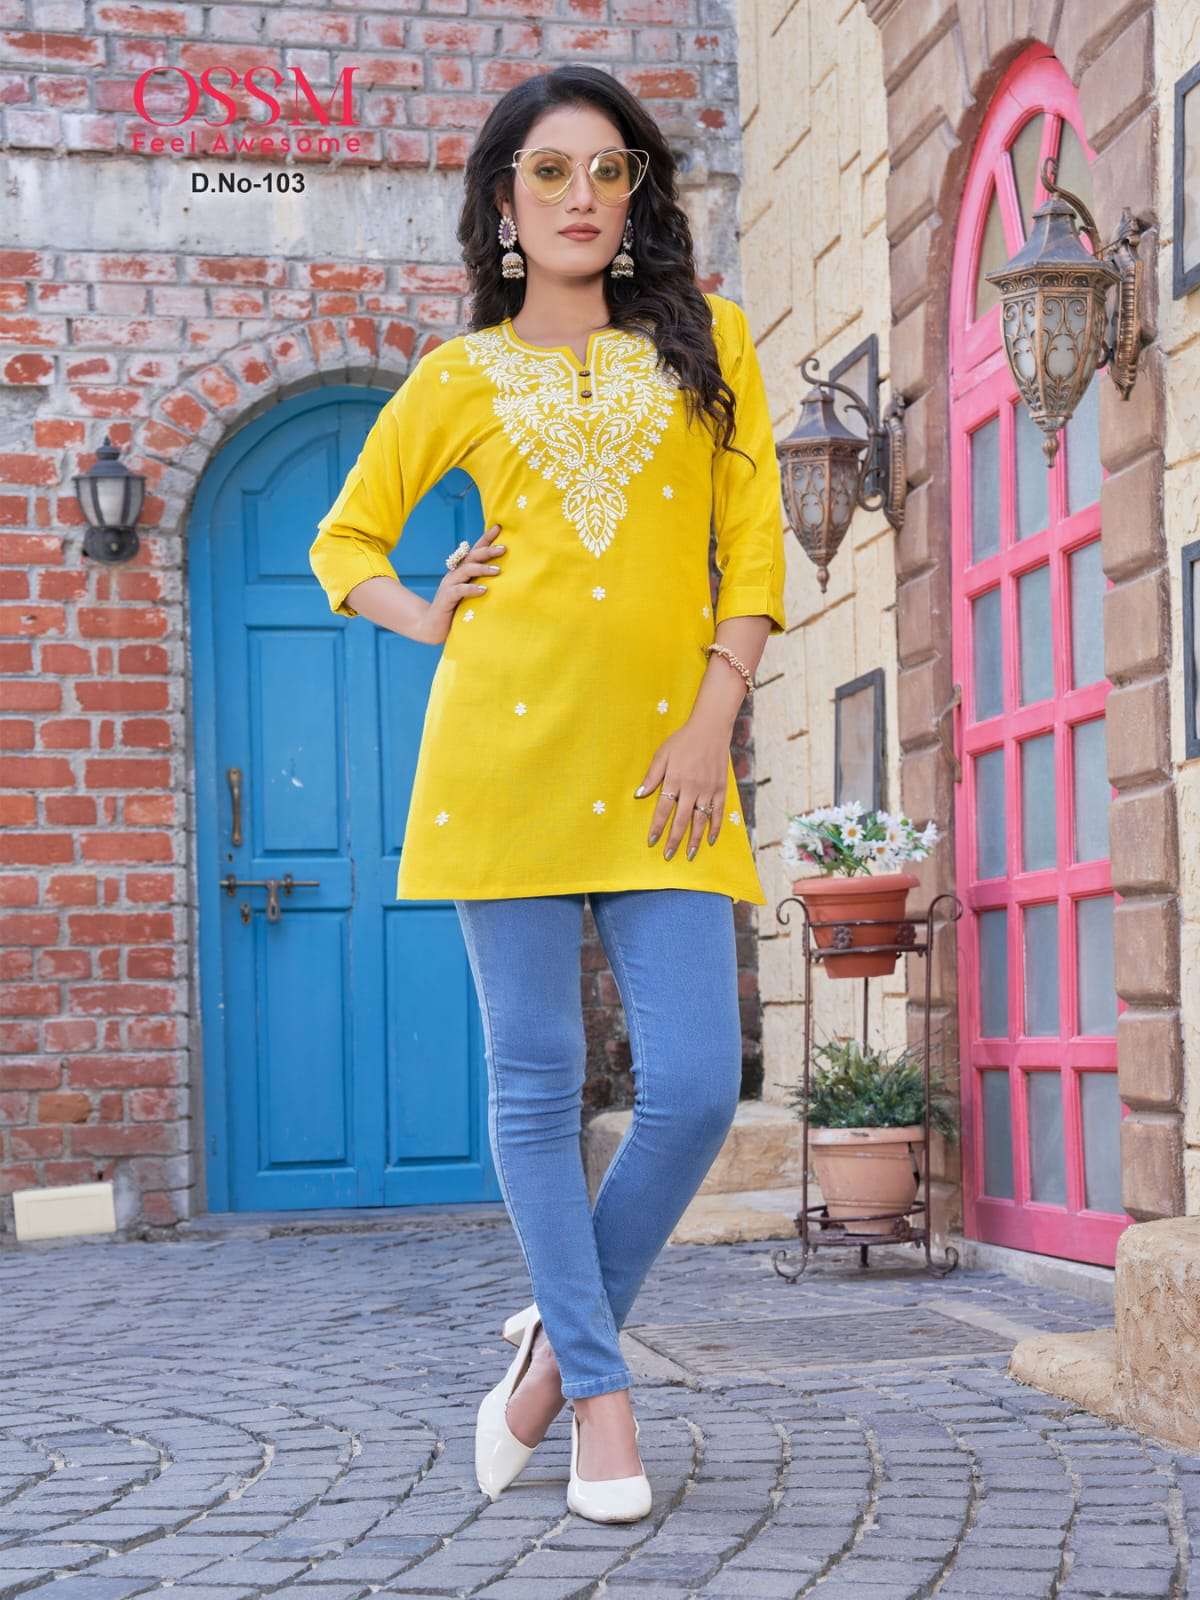 Nora By Ossm 101 To 106 Series Beautiful Stylish Fancy Colorful Casual Wear & Ethnic Wear Heavy Rayon Embroidered Tops At Wholesale Price